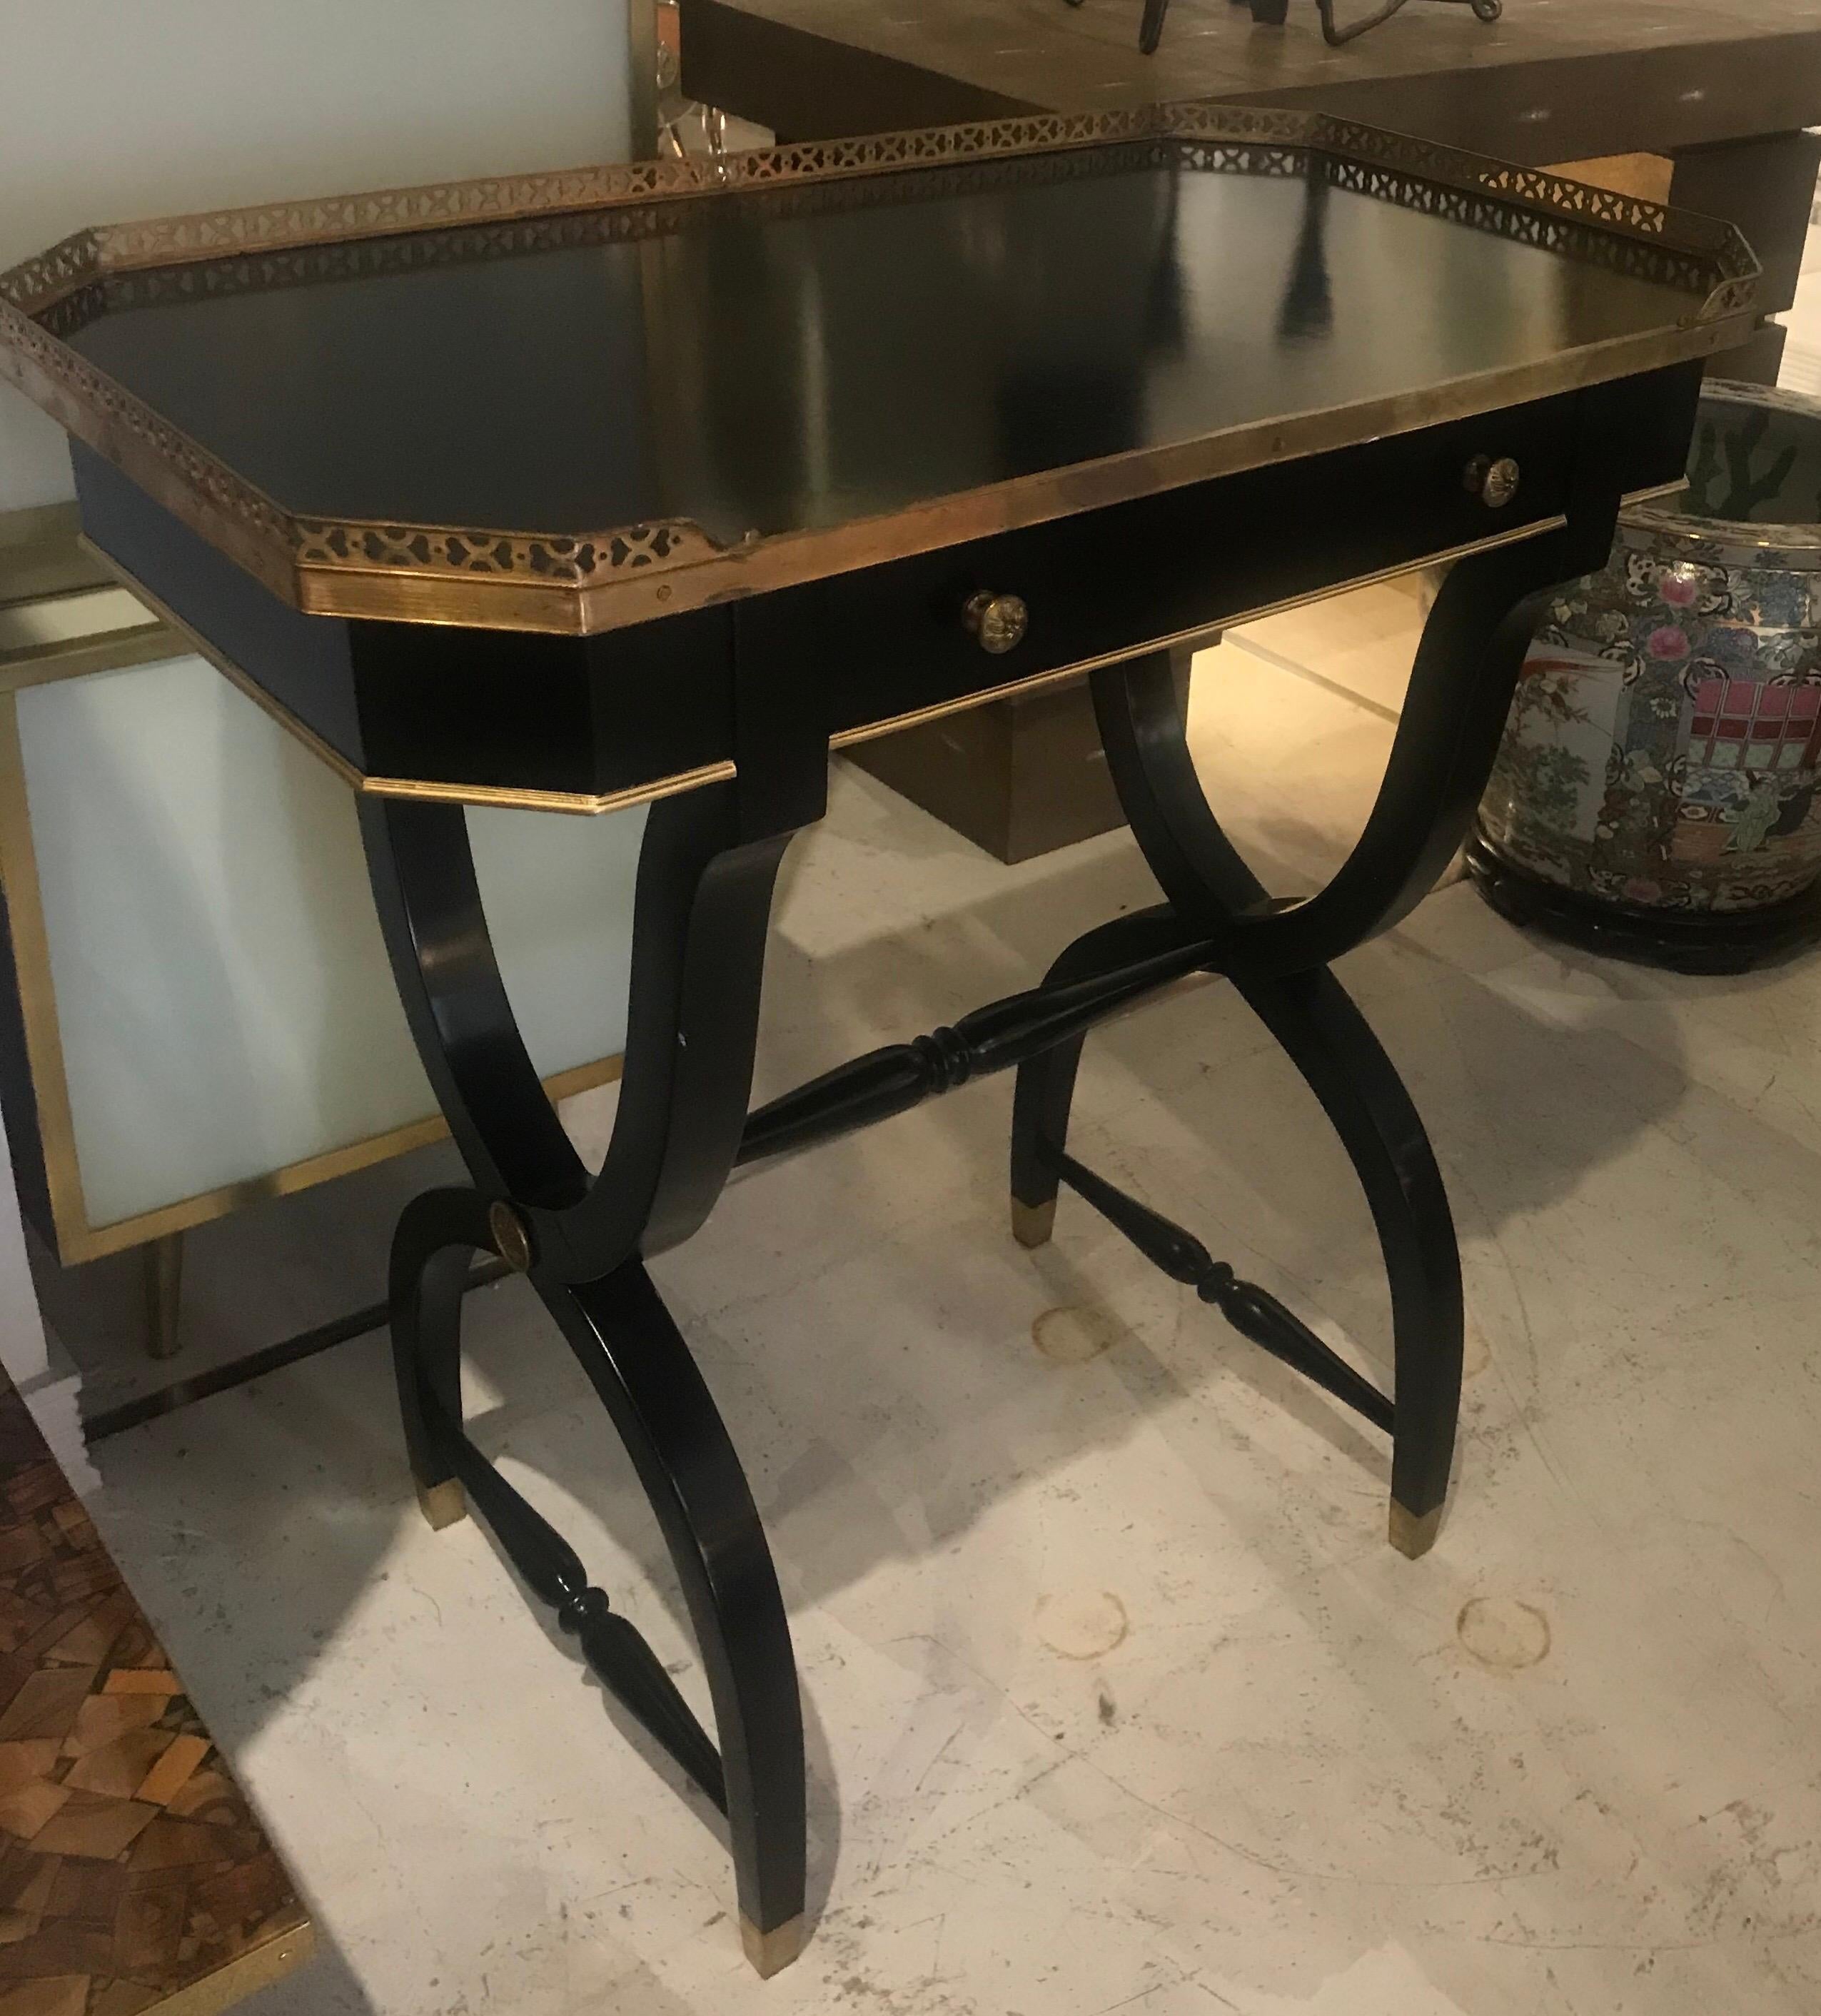 A stunning midcentury French neoclassical writing desk or console of beautiful ebonized wood with bronze trim and details. This neoclassical console table or writing desk have Curule style legs with an ebonized finish and decorative floral mounts,